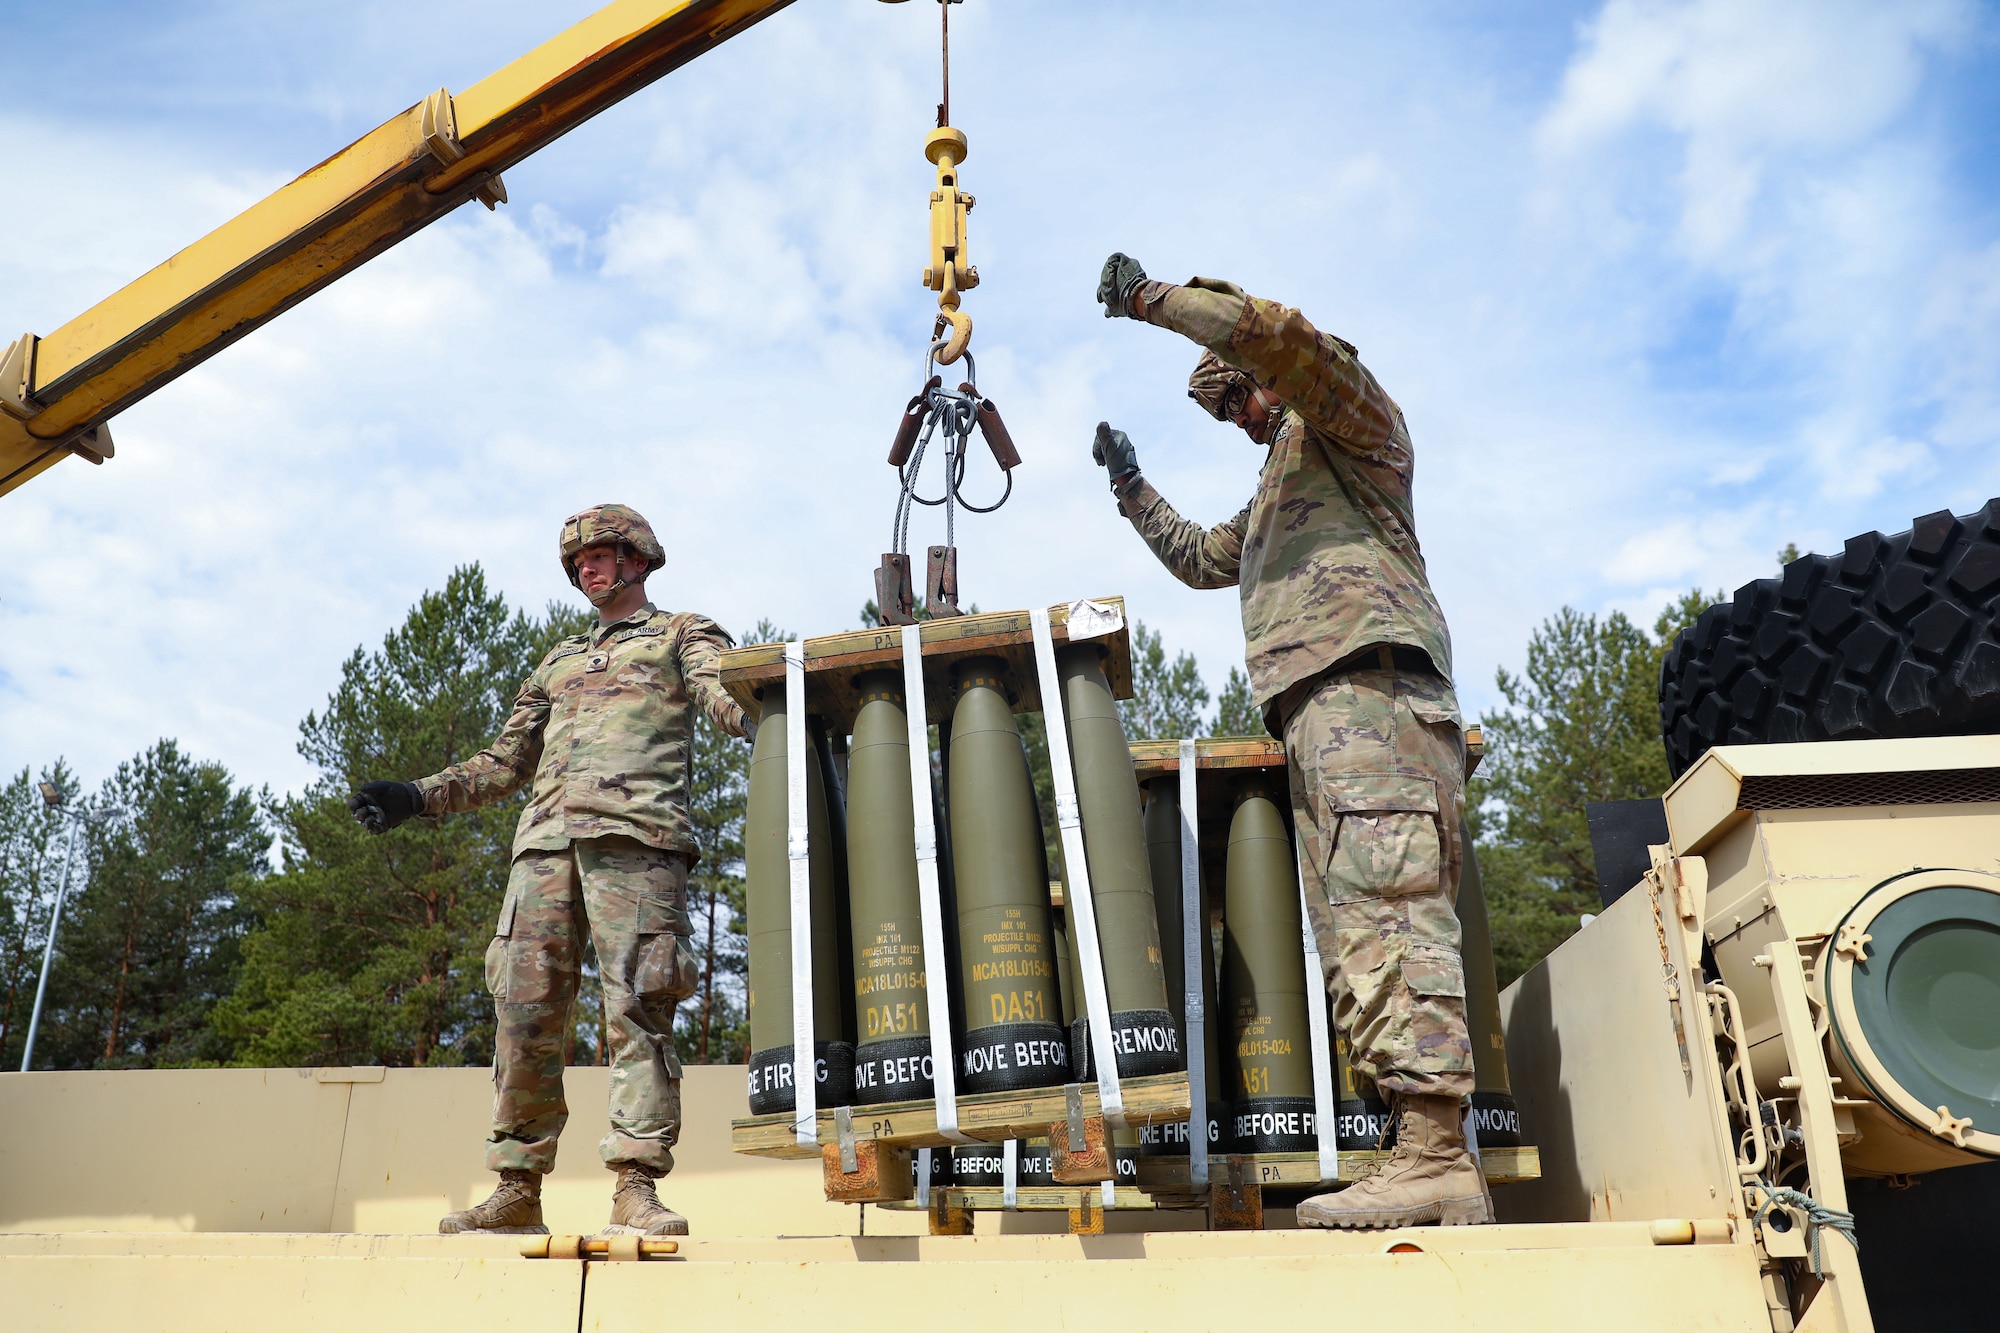 U.S. Army Spc. Jonathan Guernsey, left, and U.S. Army Spc. Khym Wilson, both assigned to the Forward Support Company, 119th Field Artillery Regiment, Michigan Army National Guard, guide the crane operator during Summer Shield at Forward Operating Site Adazi, Latvia, May 19, 2022. Summer Shield is one of U.S. Army Europe and Africa’s multinational training exercises in Eastern Europe that make up Defender Europe 22.